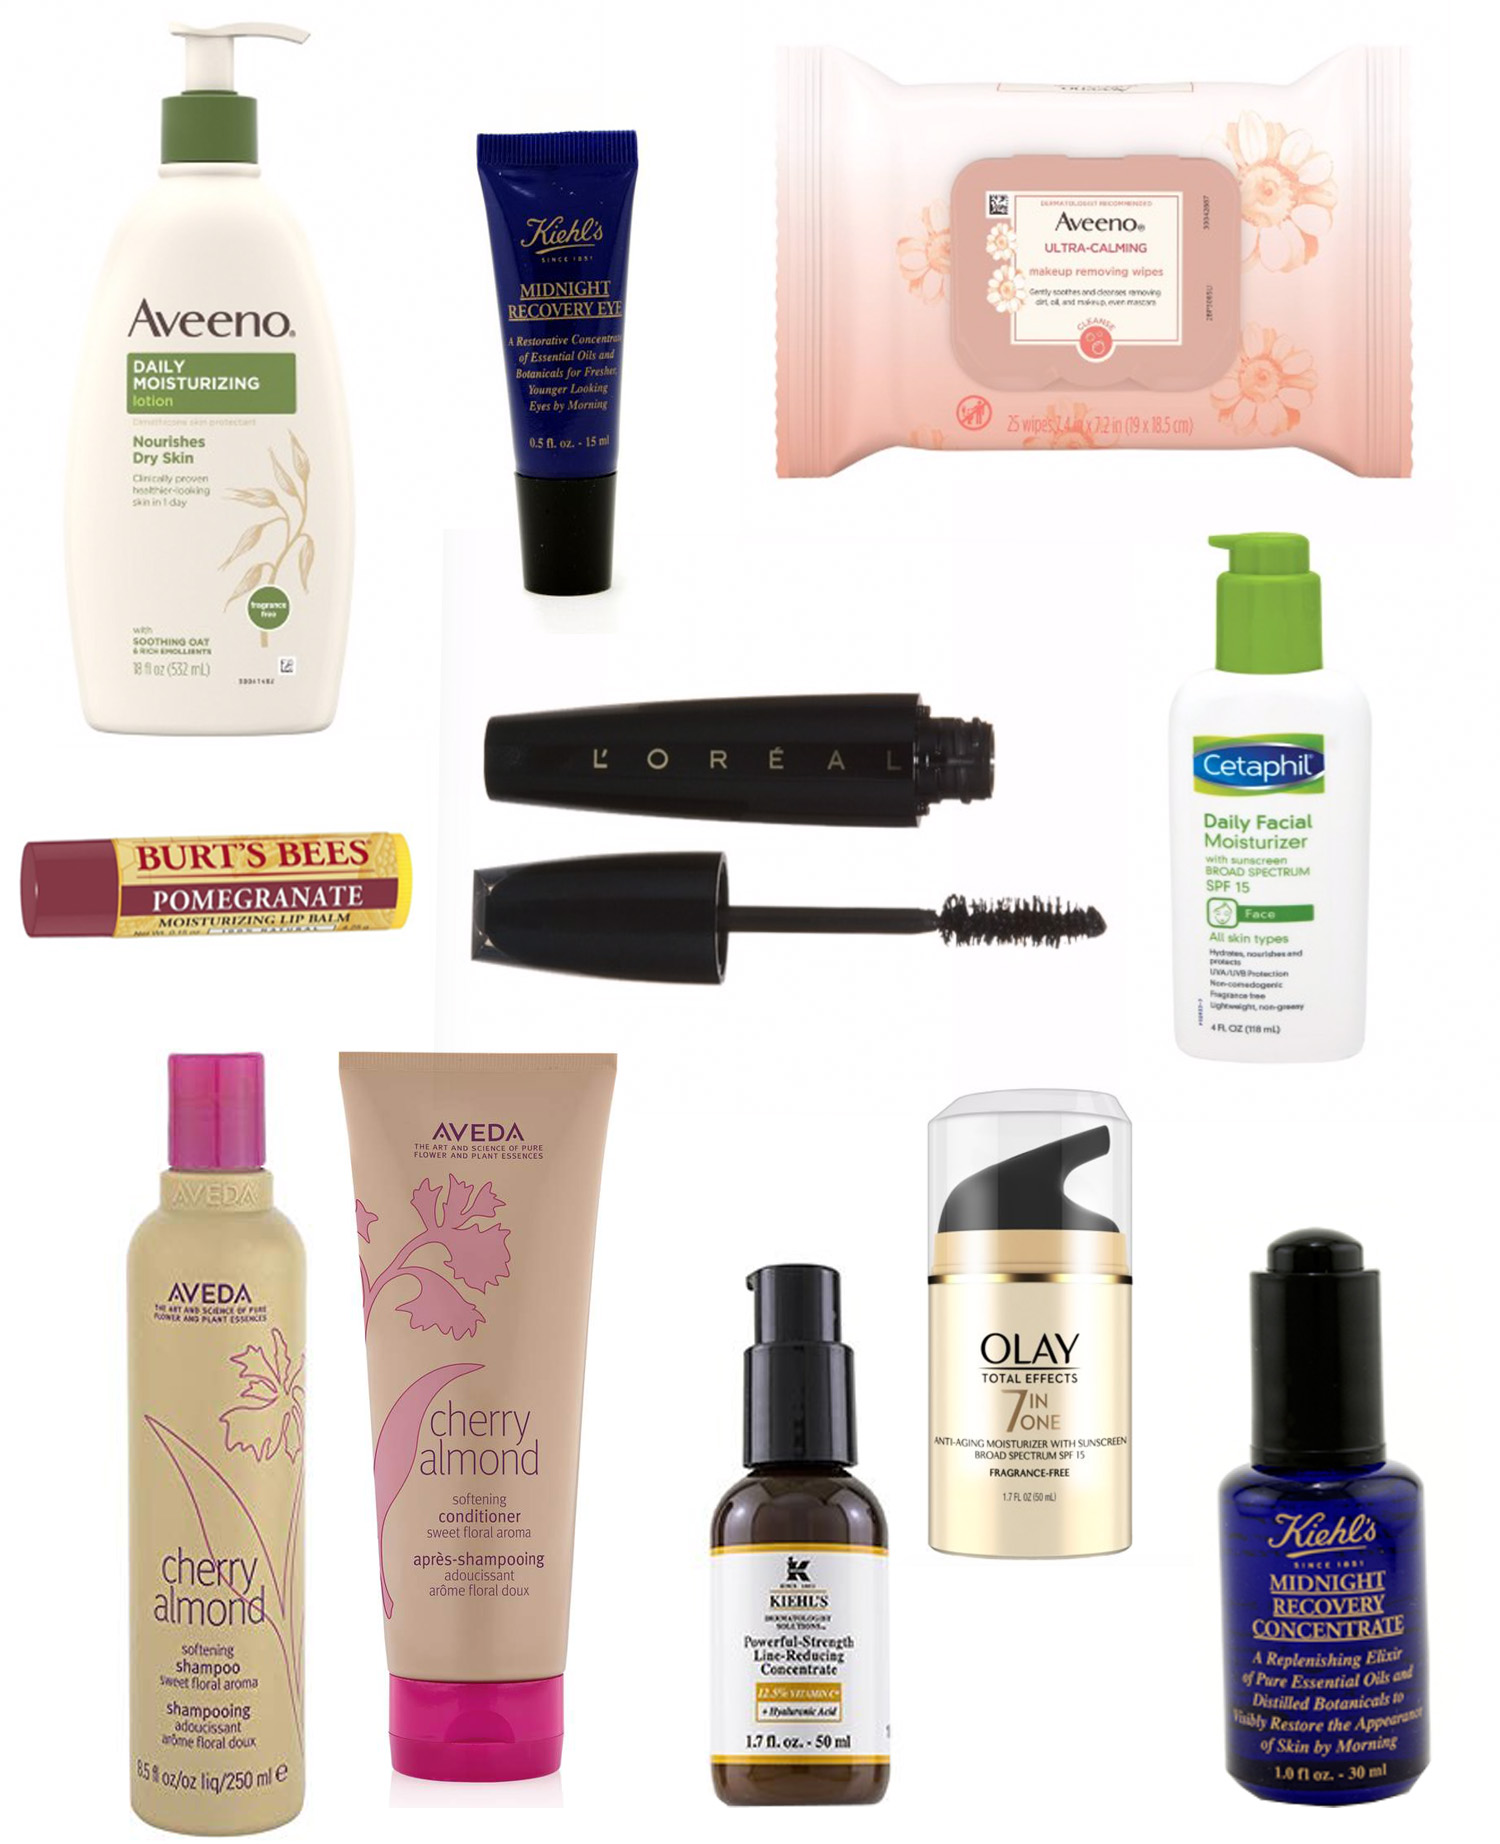 My Favorite Drugstore Makeup and Skin Care Products